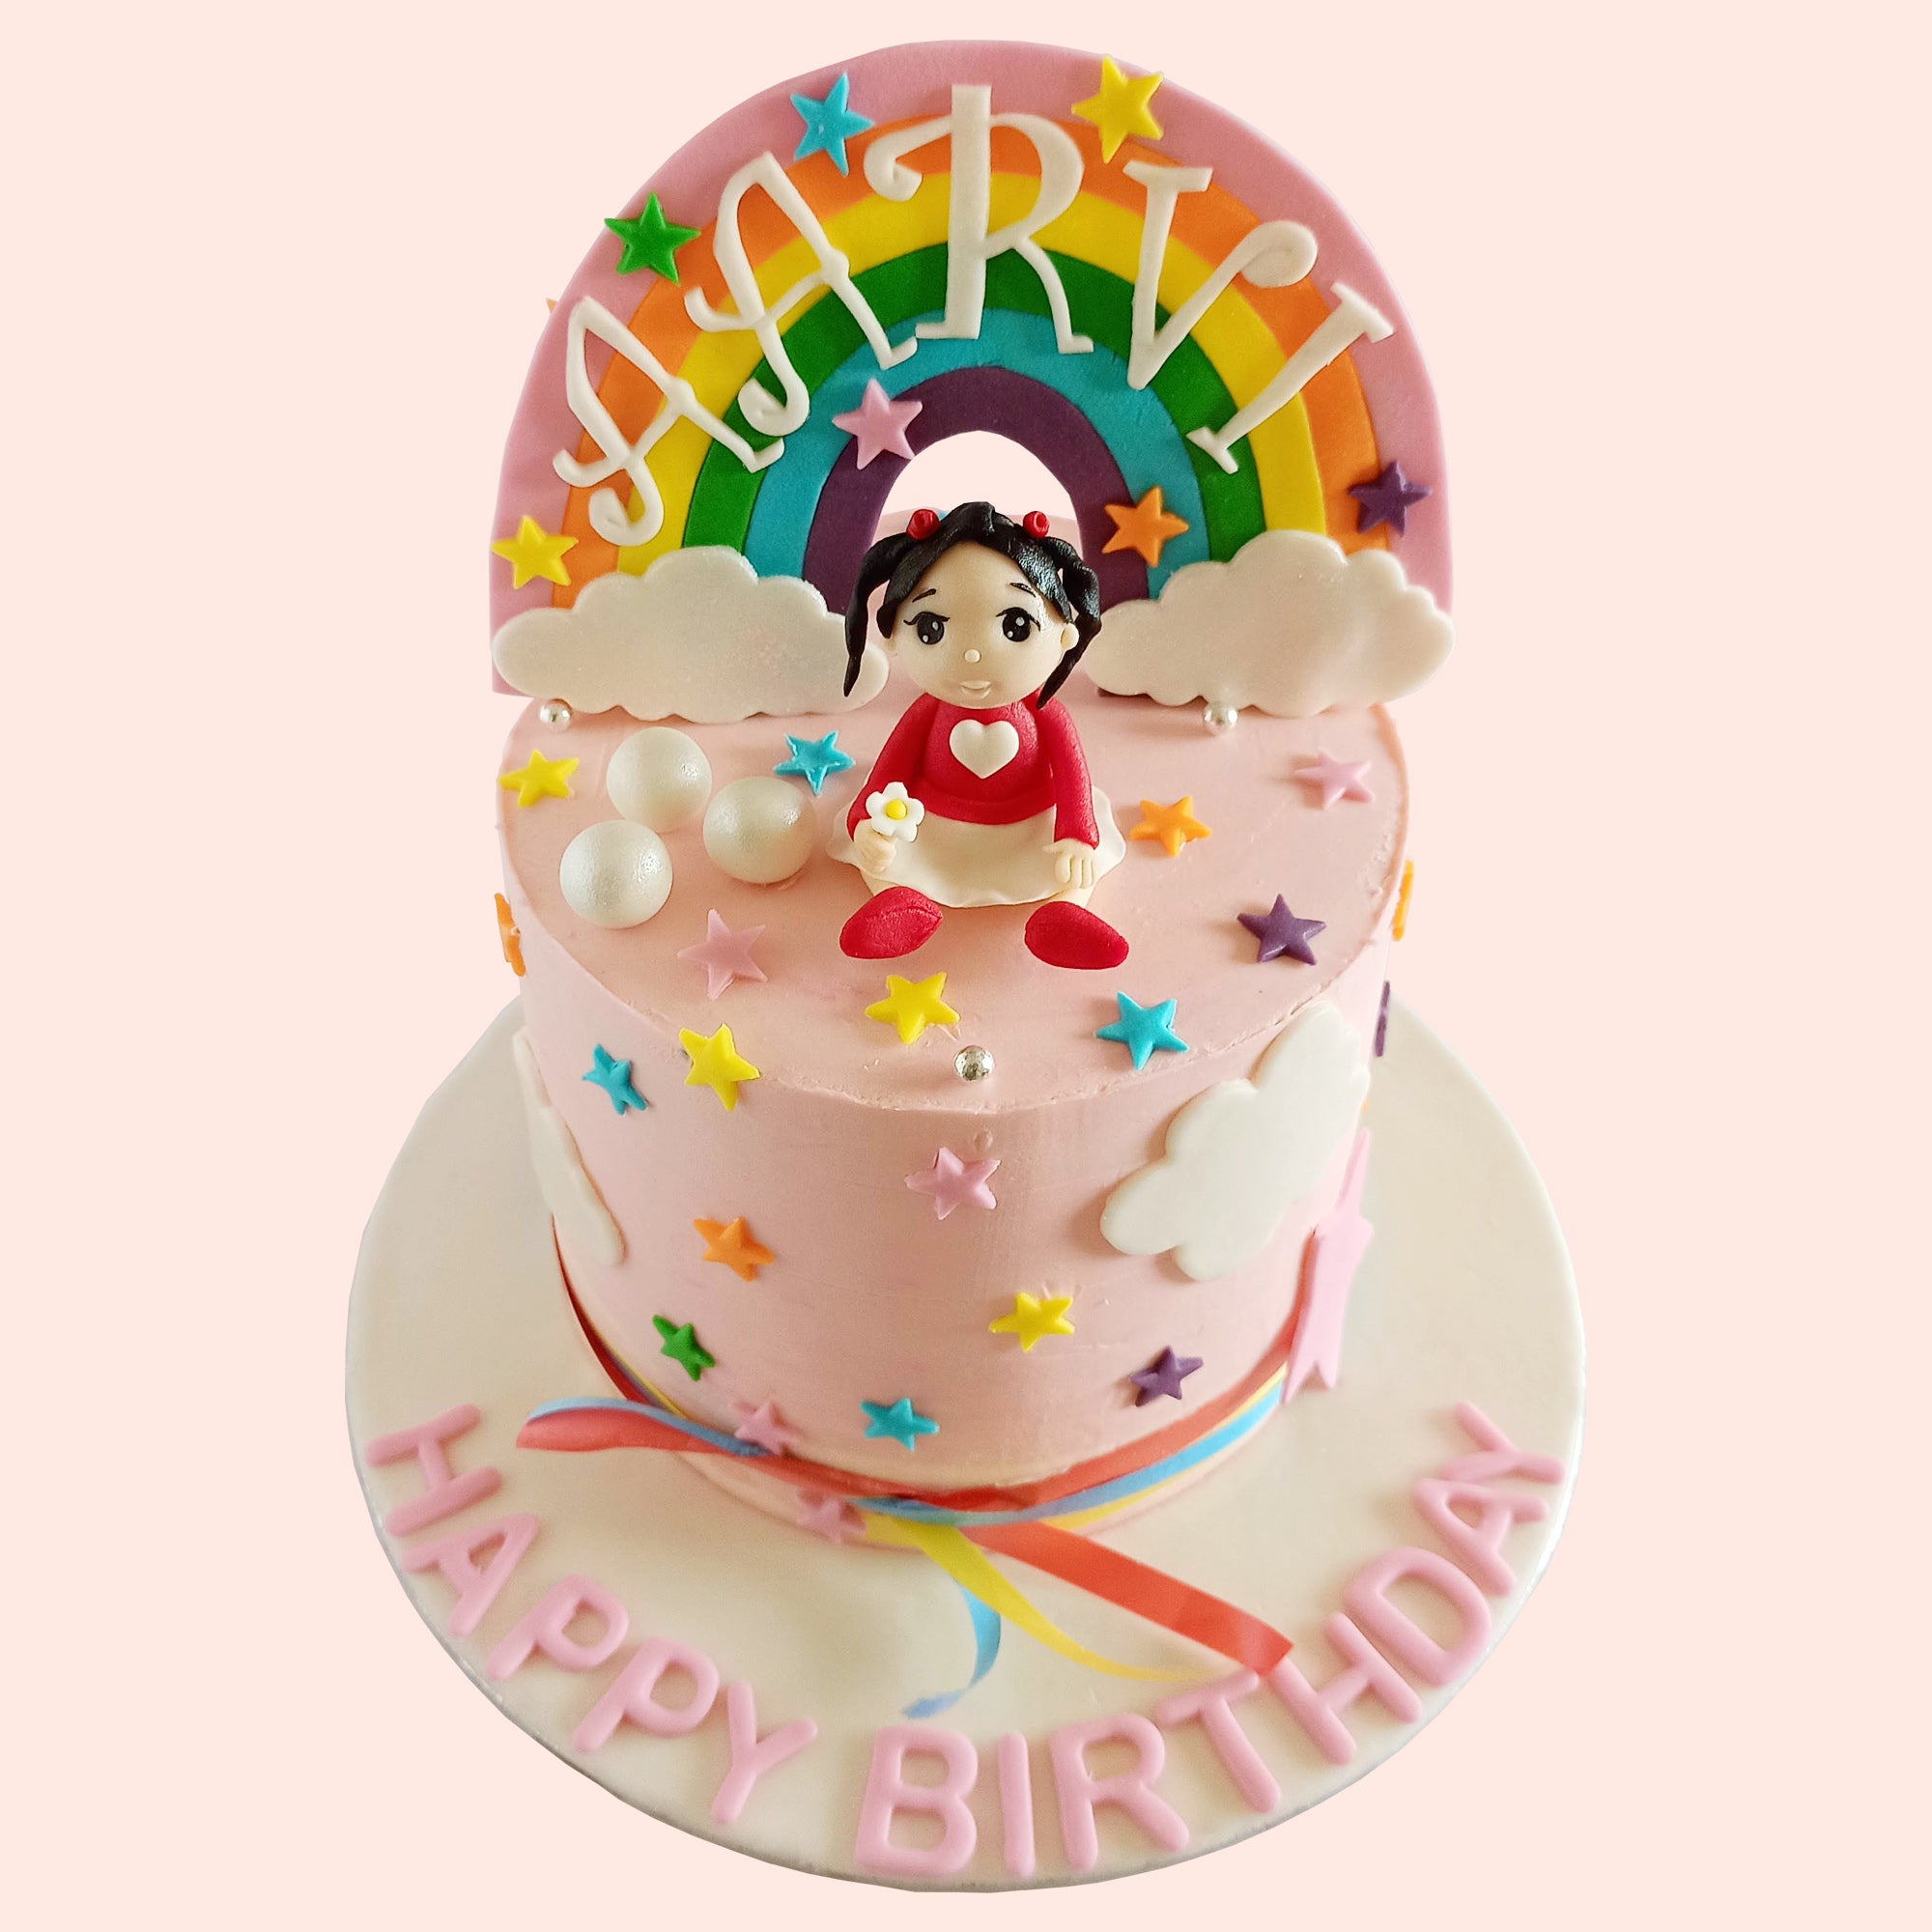 Rainbow Cake Toppers – This Little Cakery